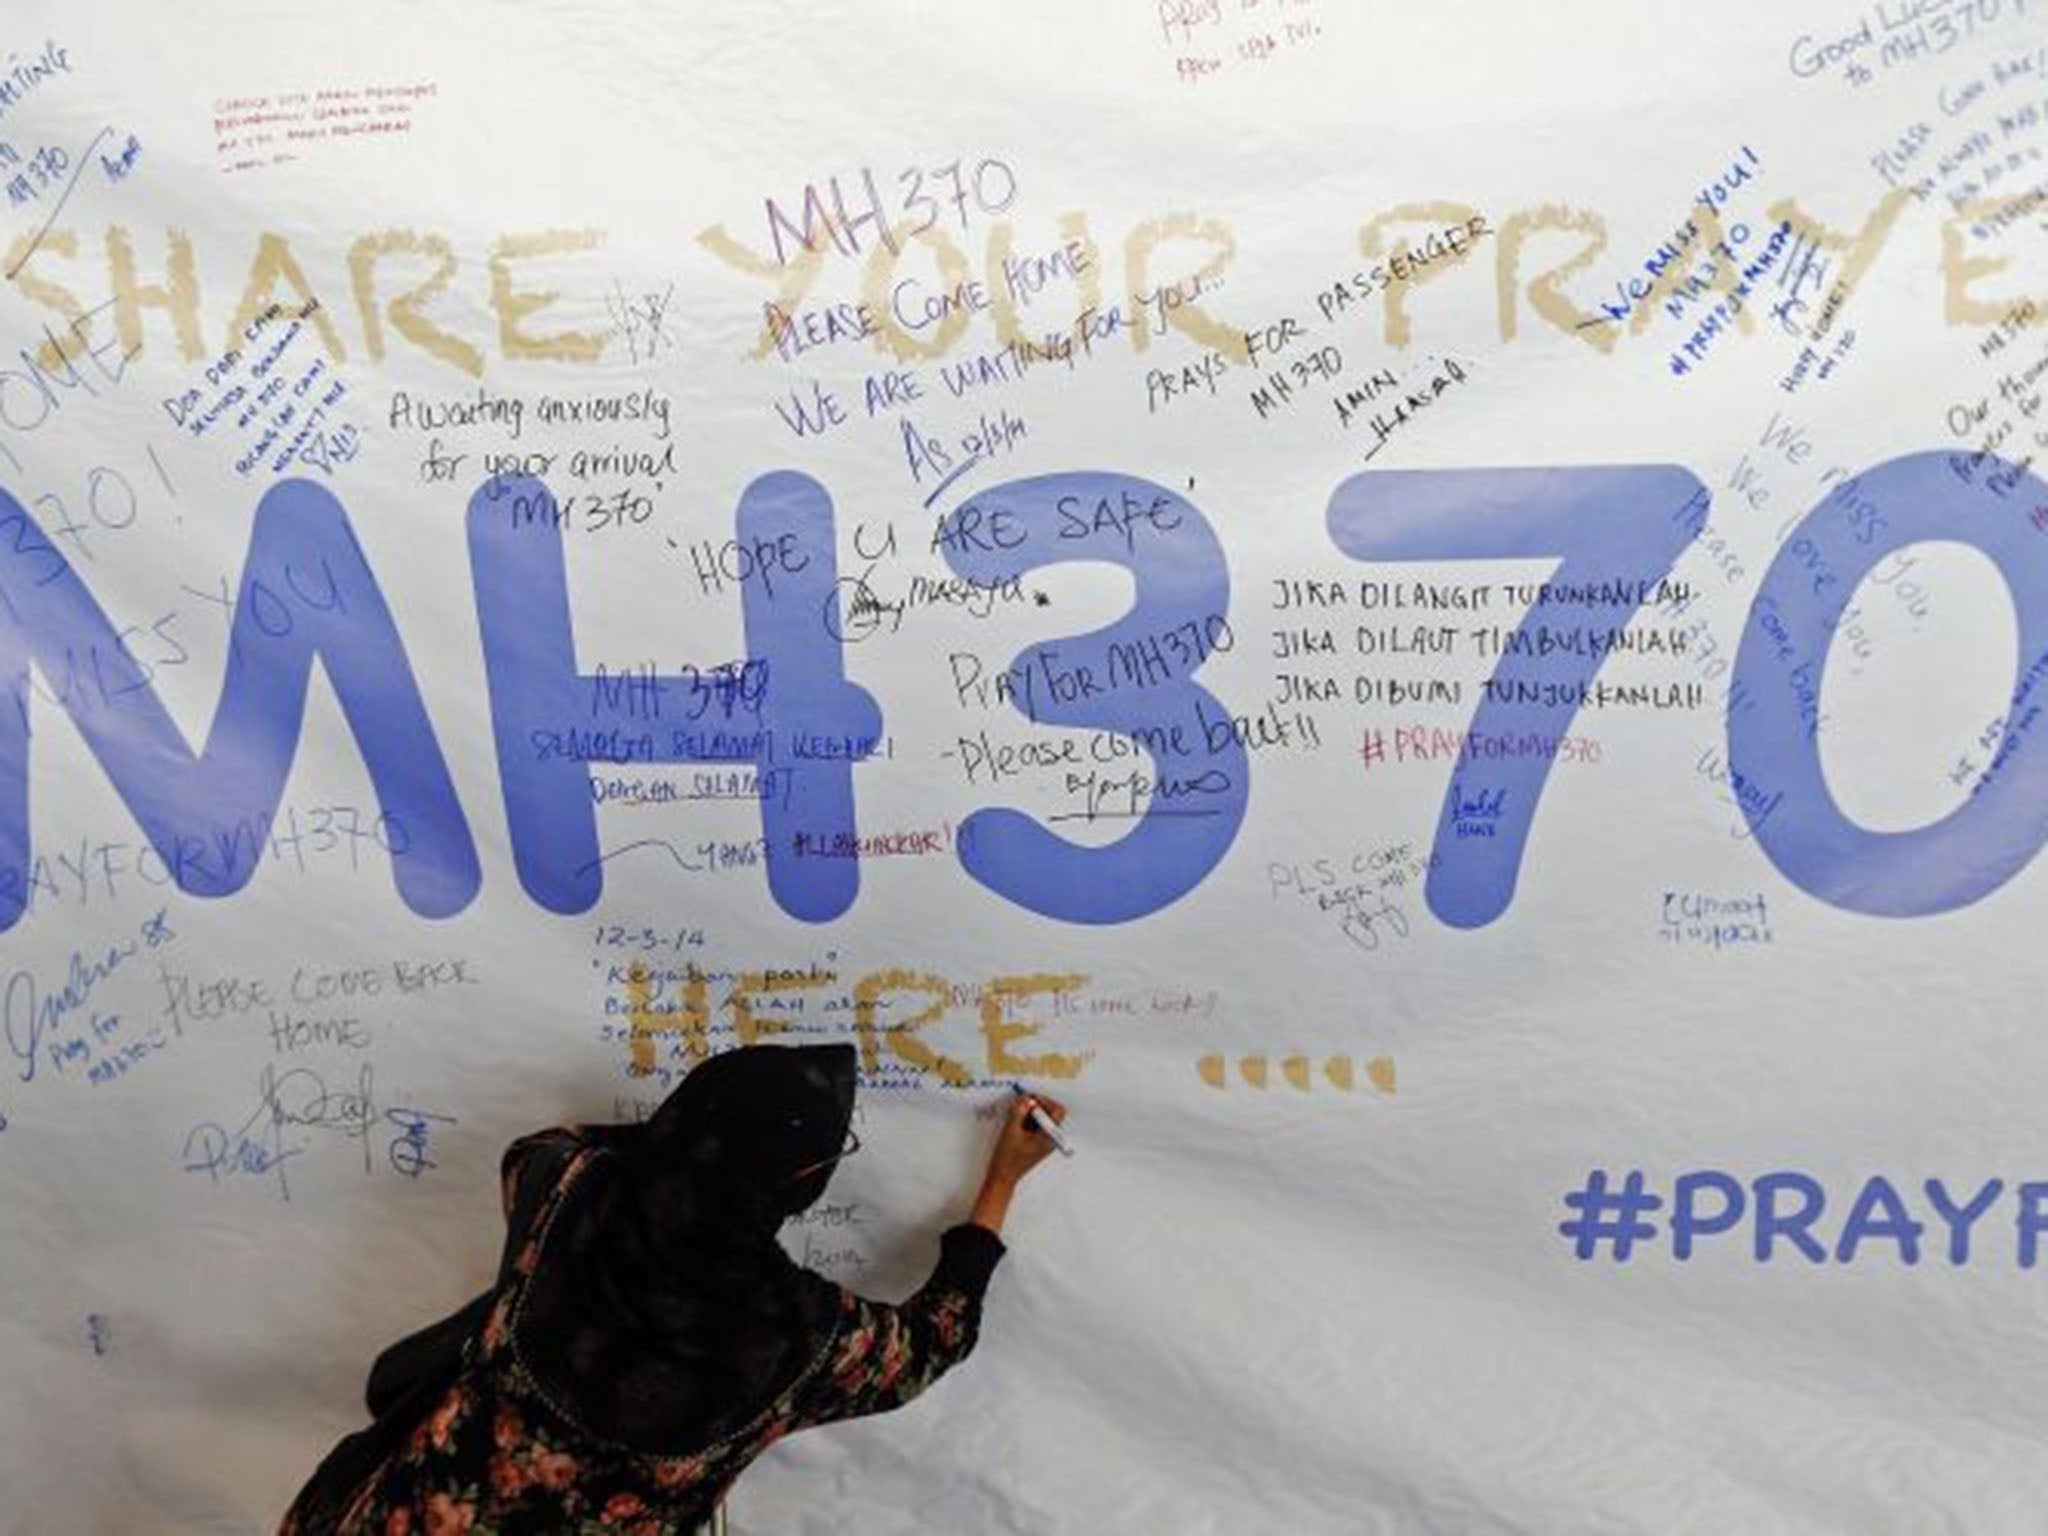 MH370 disappeared en route to Beijing in China with 239 people on board in March 2014